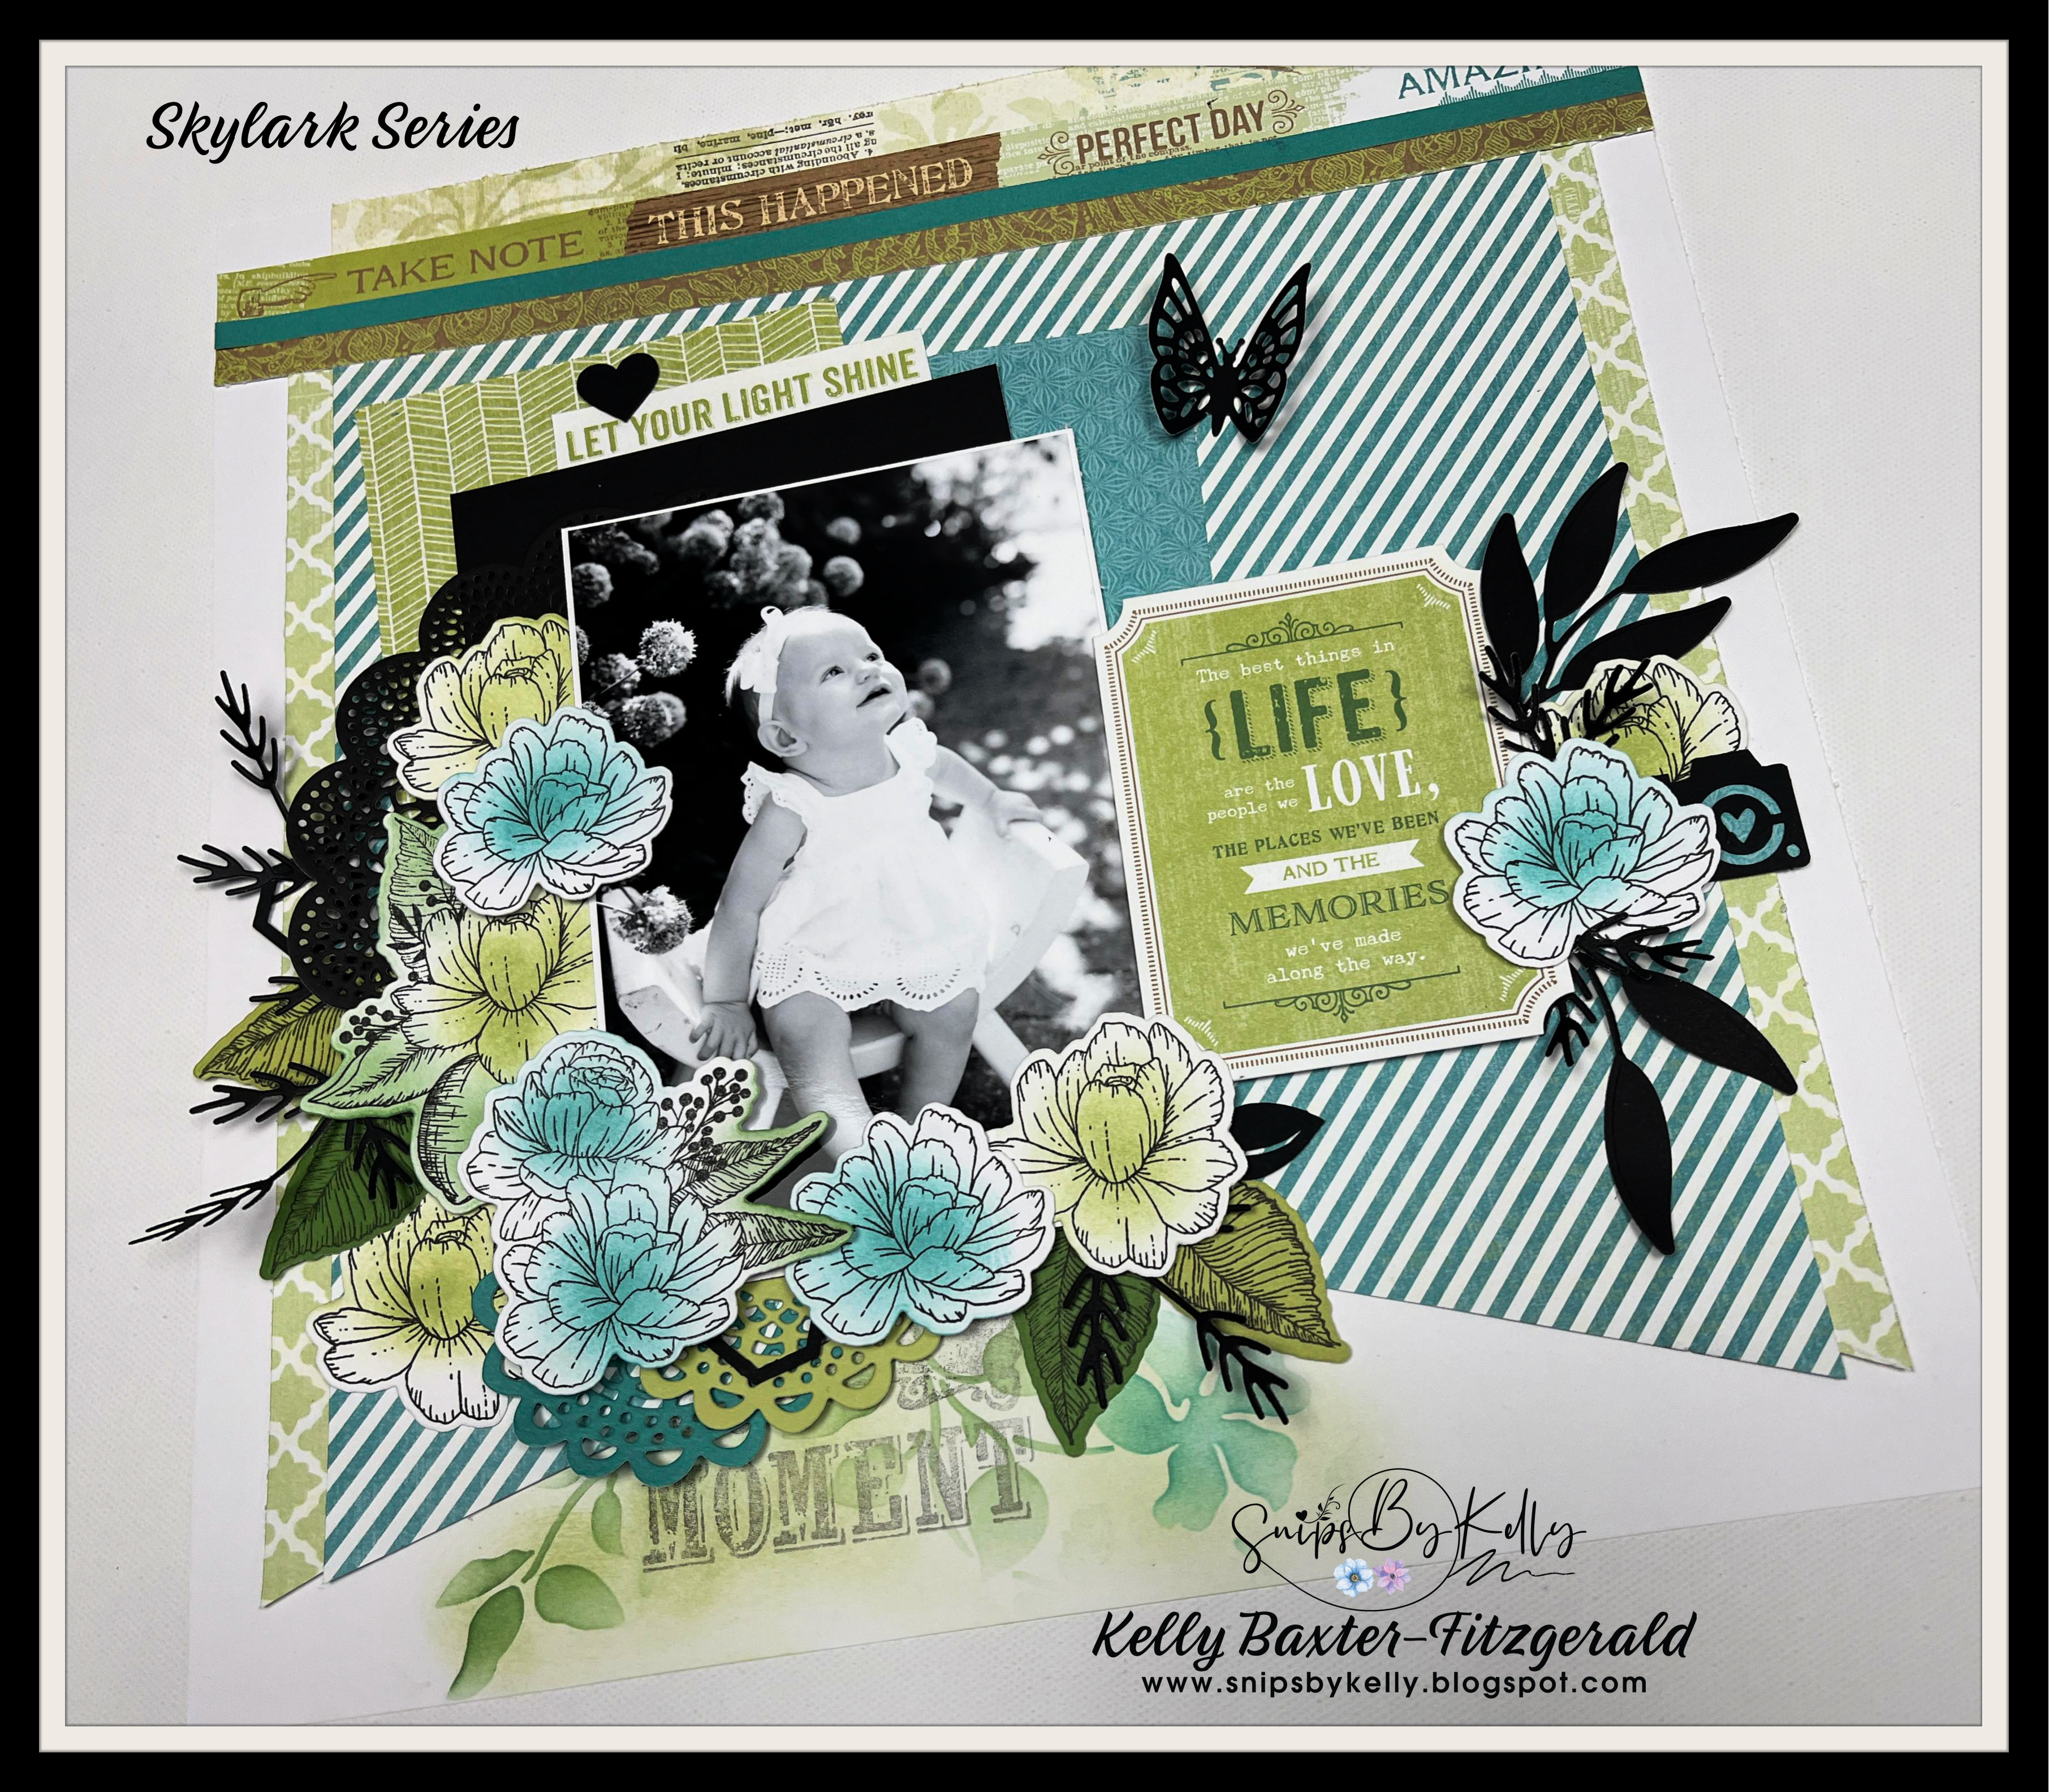 How To Make Stencils For Cute Scrapbook Layout Backgrounds@snipsbykelly 